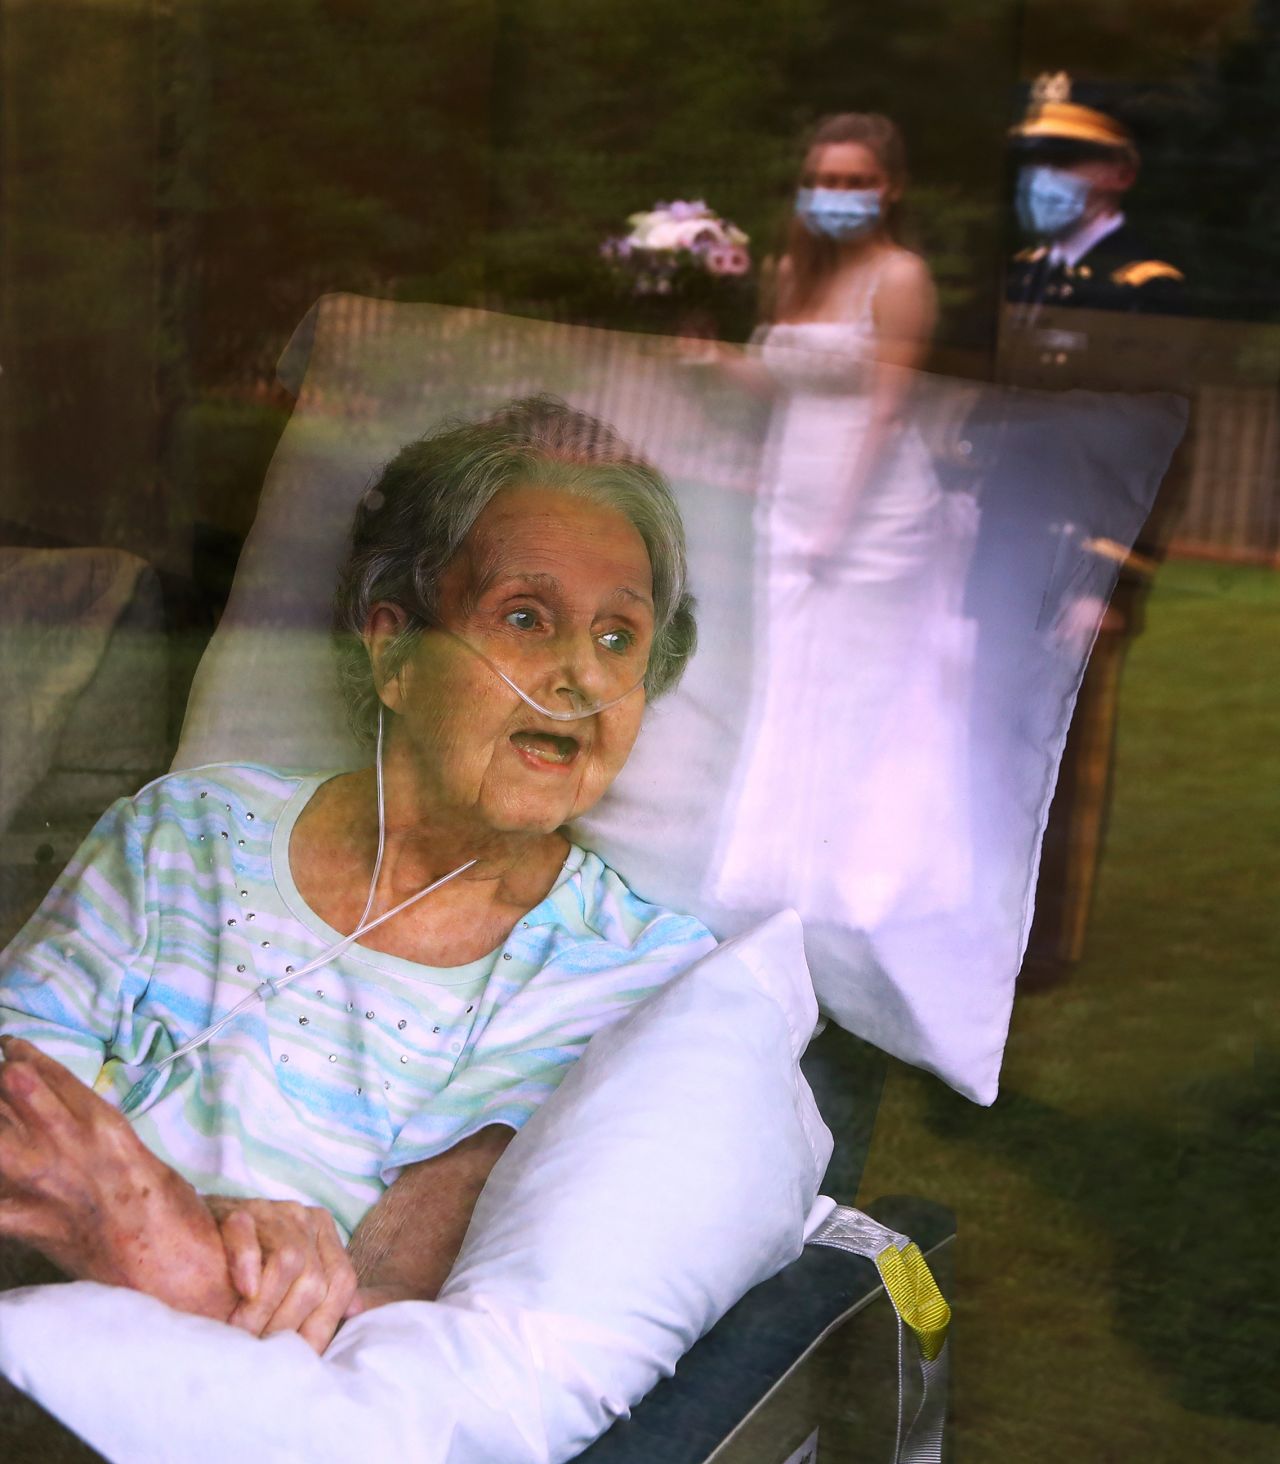 Jacqueline Cavender, 84, reacts as her grandson, US Army 2nd Lt. Robert Costea, and his bride, Sarah, recreate their wedding for her outside a medical facility in Jackson, Georgia, on June 7.